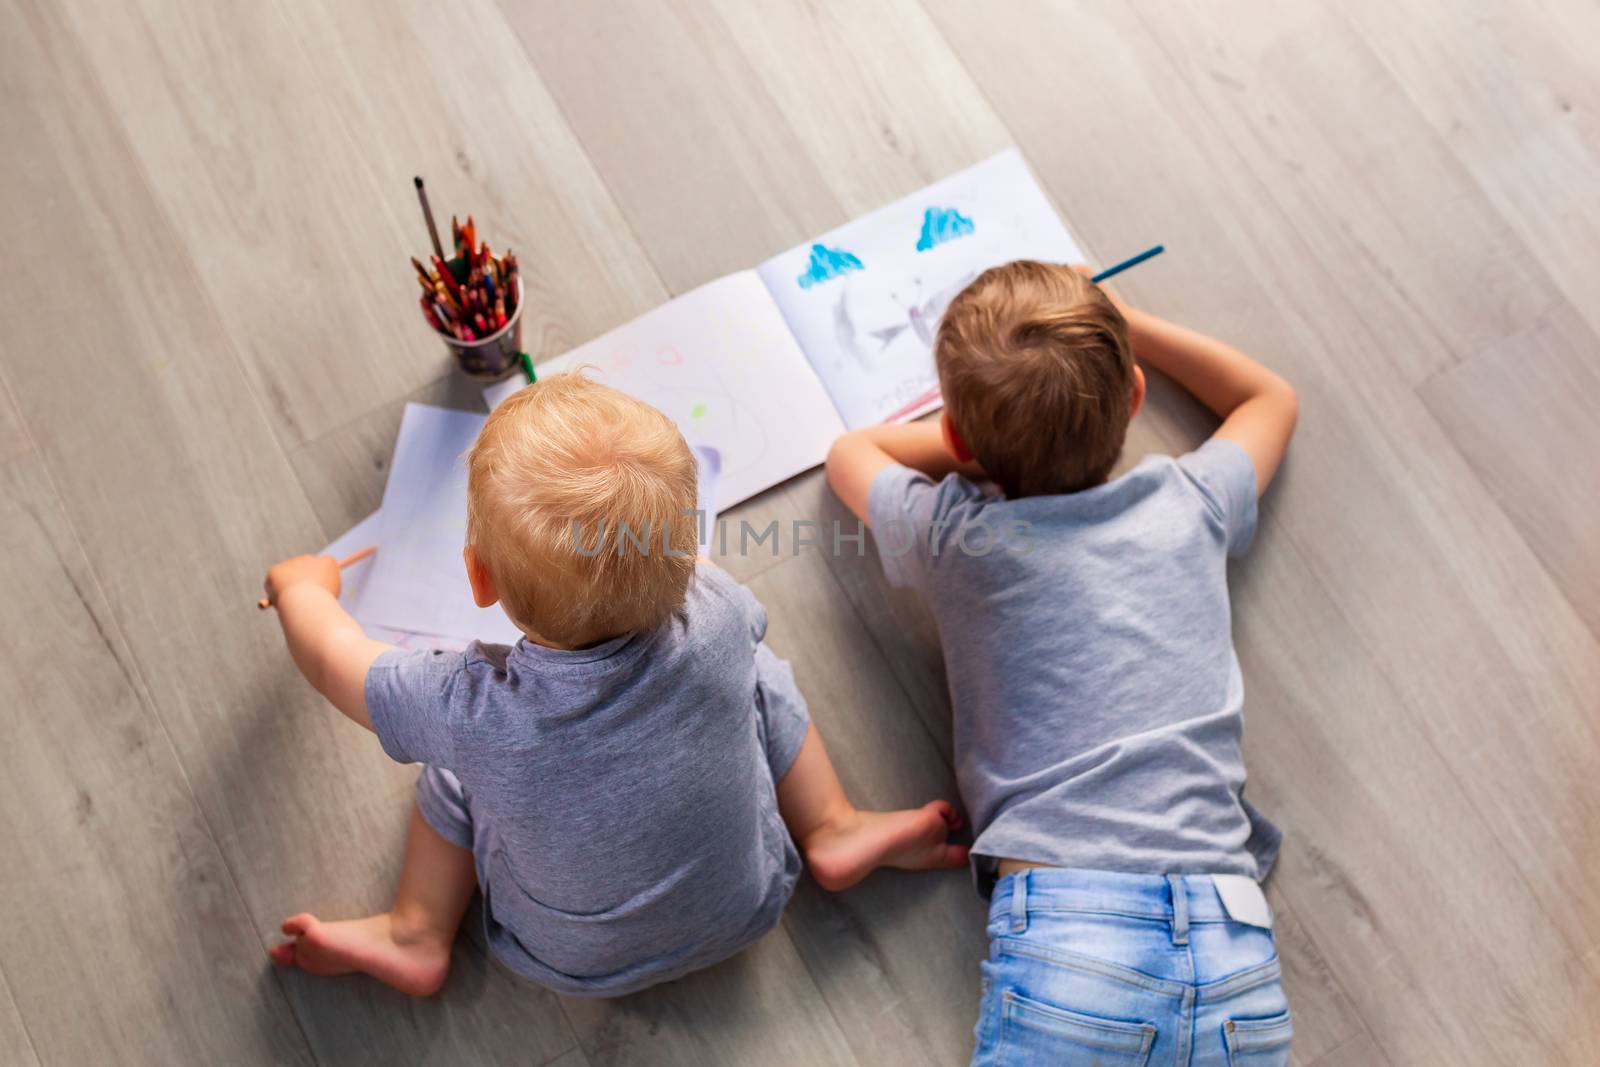 Two little boys drawing on the floor in his room by Len44ik